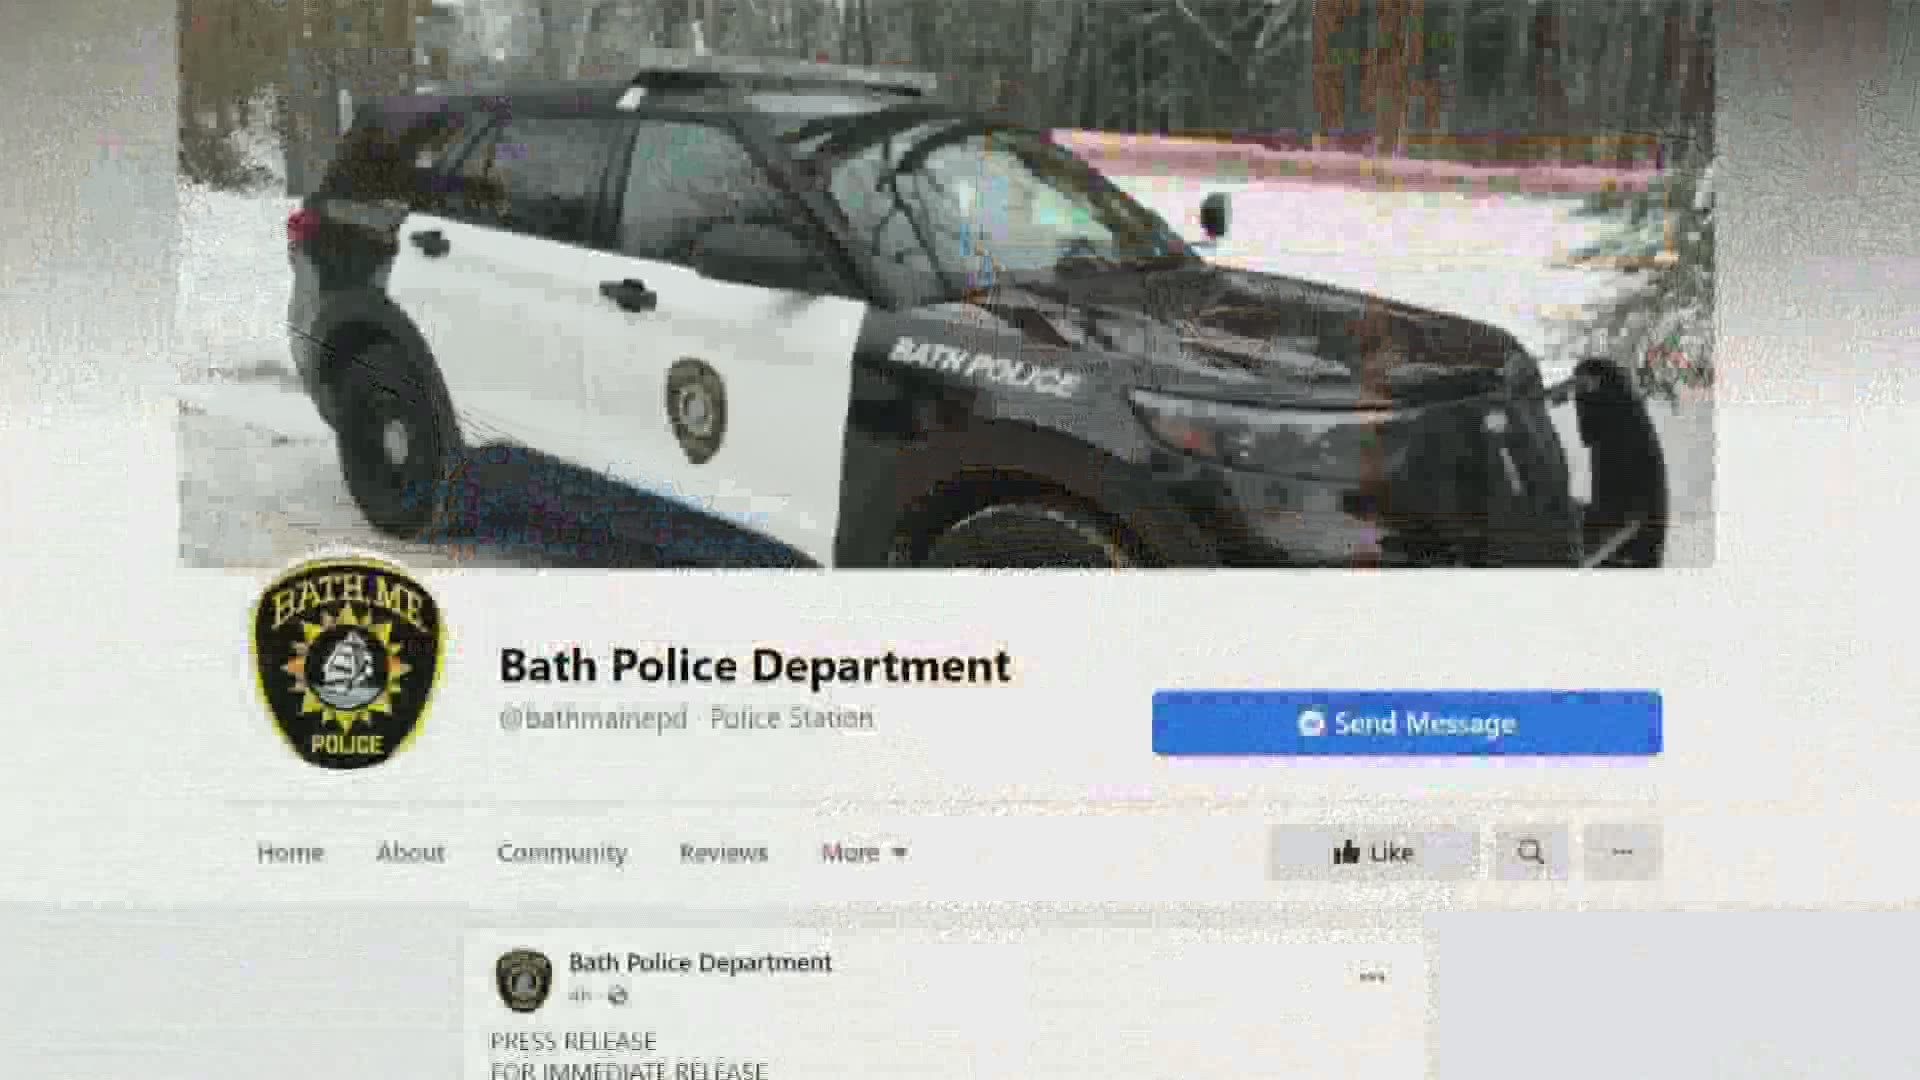 Bath’s retired police chief, Lawrence "Max" Dawson, passed away unexpectedly in his home Friday. He began his career with the Bath PD in 1974, then retiring in 1998.